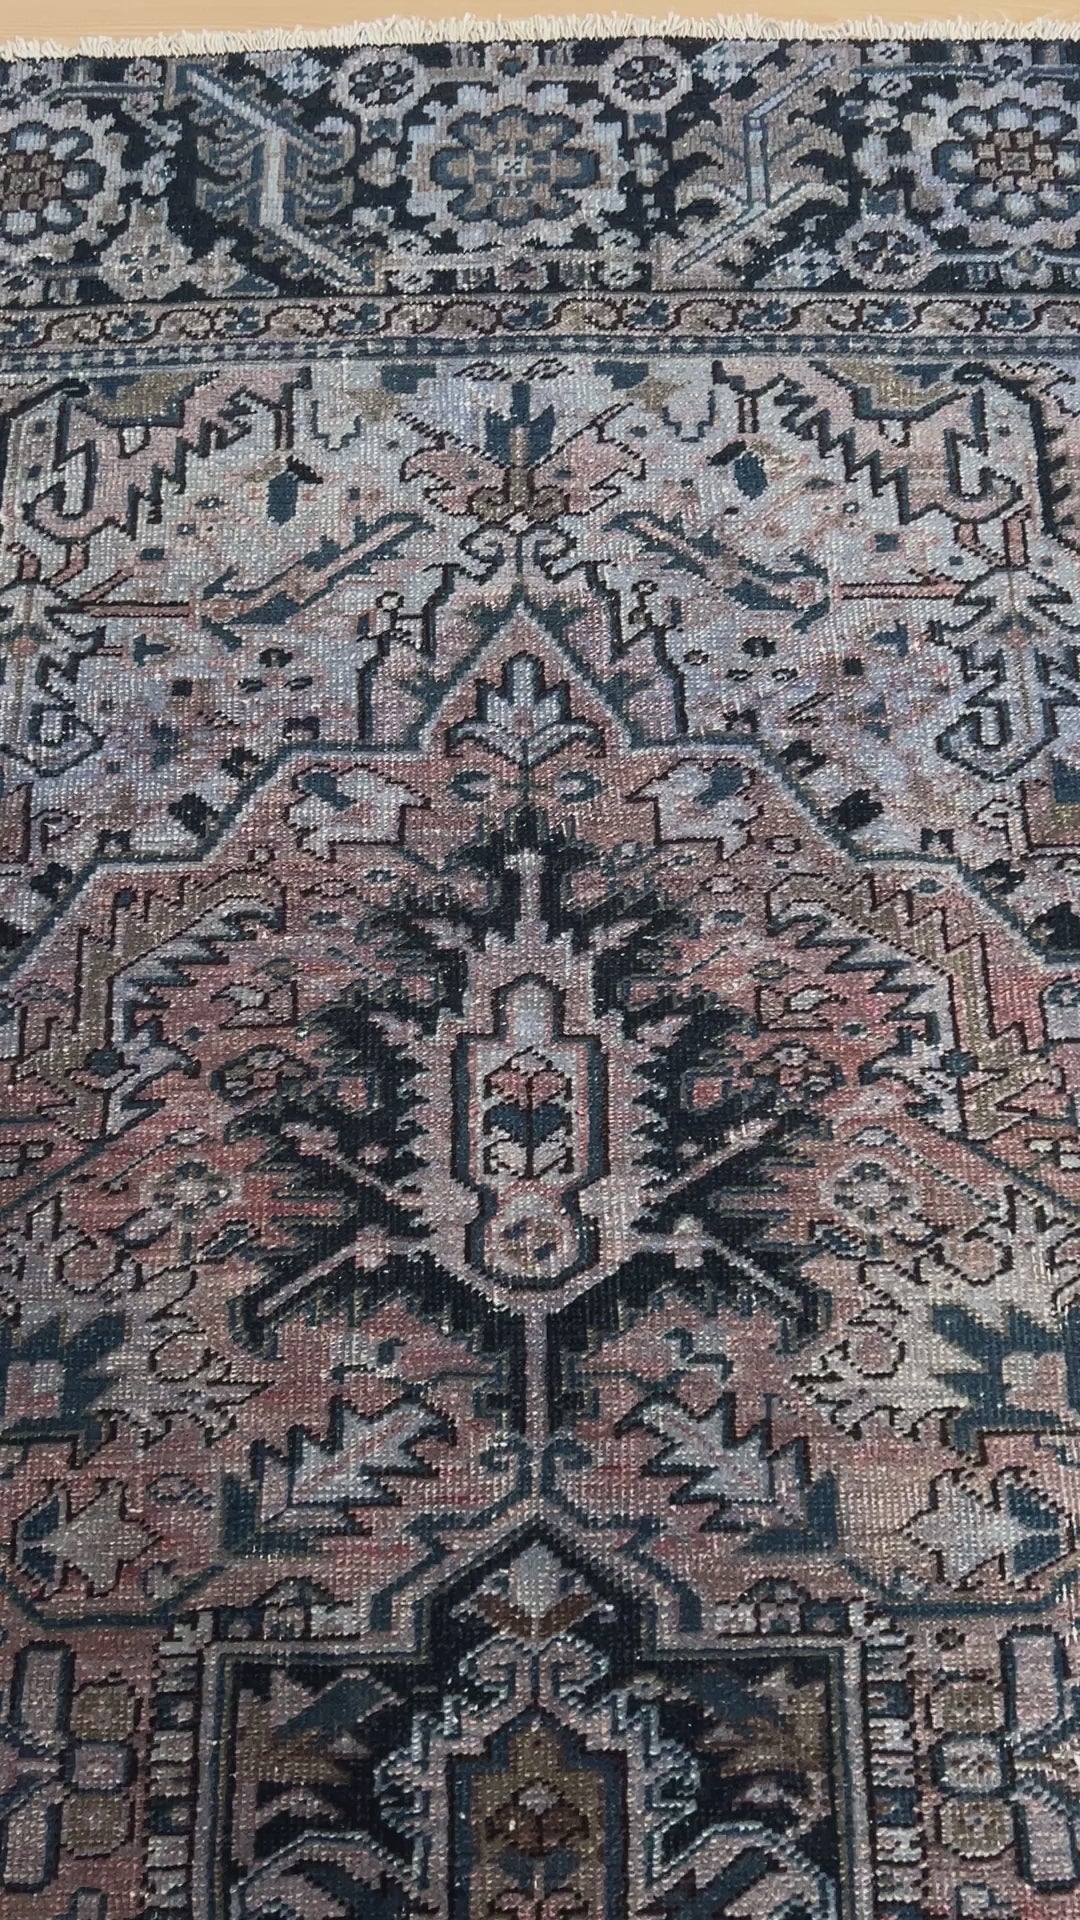 Heriz Serapi Muted Persian Rug. Oriental Rug Shop San Francisco Bay Area. Oversized Large 8x10 rug for living room, bedroom, office, dining. But oriental rug online free shipping USA and Canada.